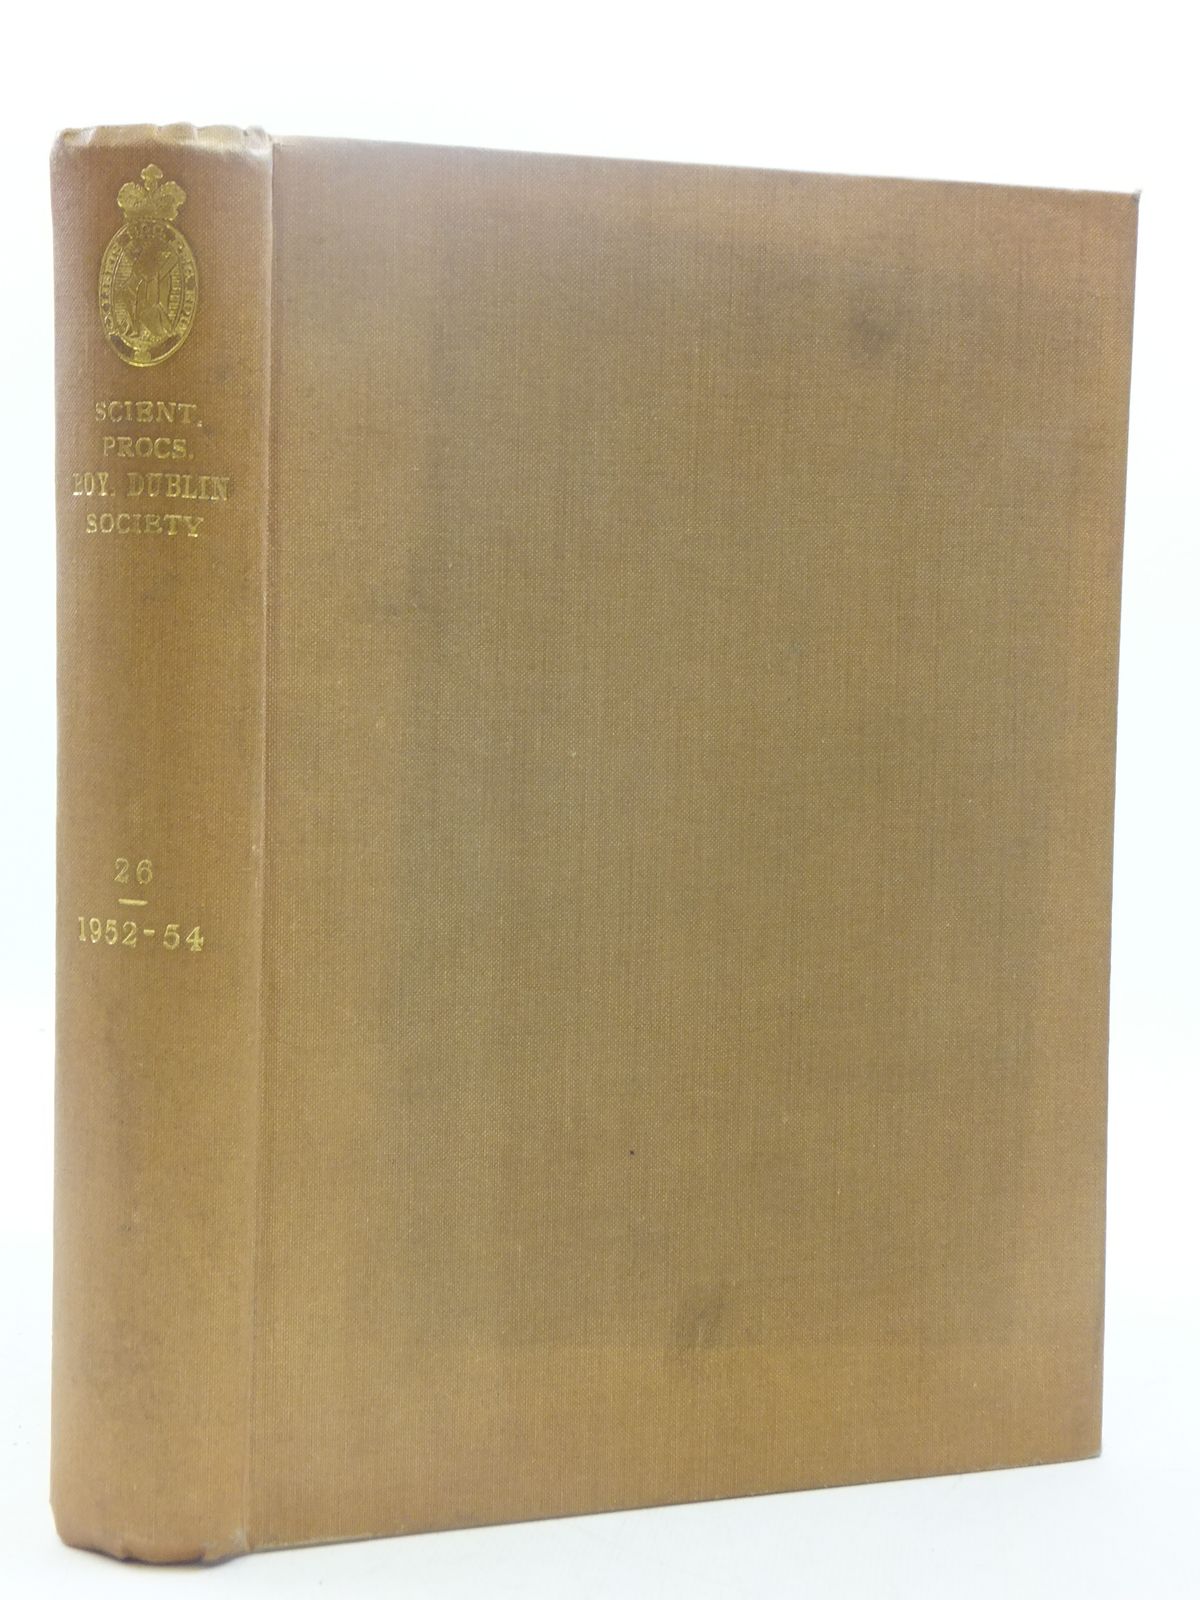 Photo of THE SCIENTIFIC PROCEEDINGS OF THE ROYAL DUBLIN SOCIETY VOLUME 26 (1952-54) published by Royal Dublin Society (STOCK CODE: 1605206)  for sale by Stella & Rose's Books